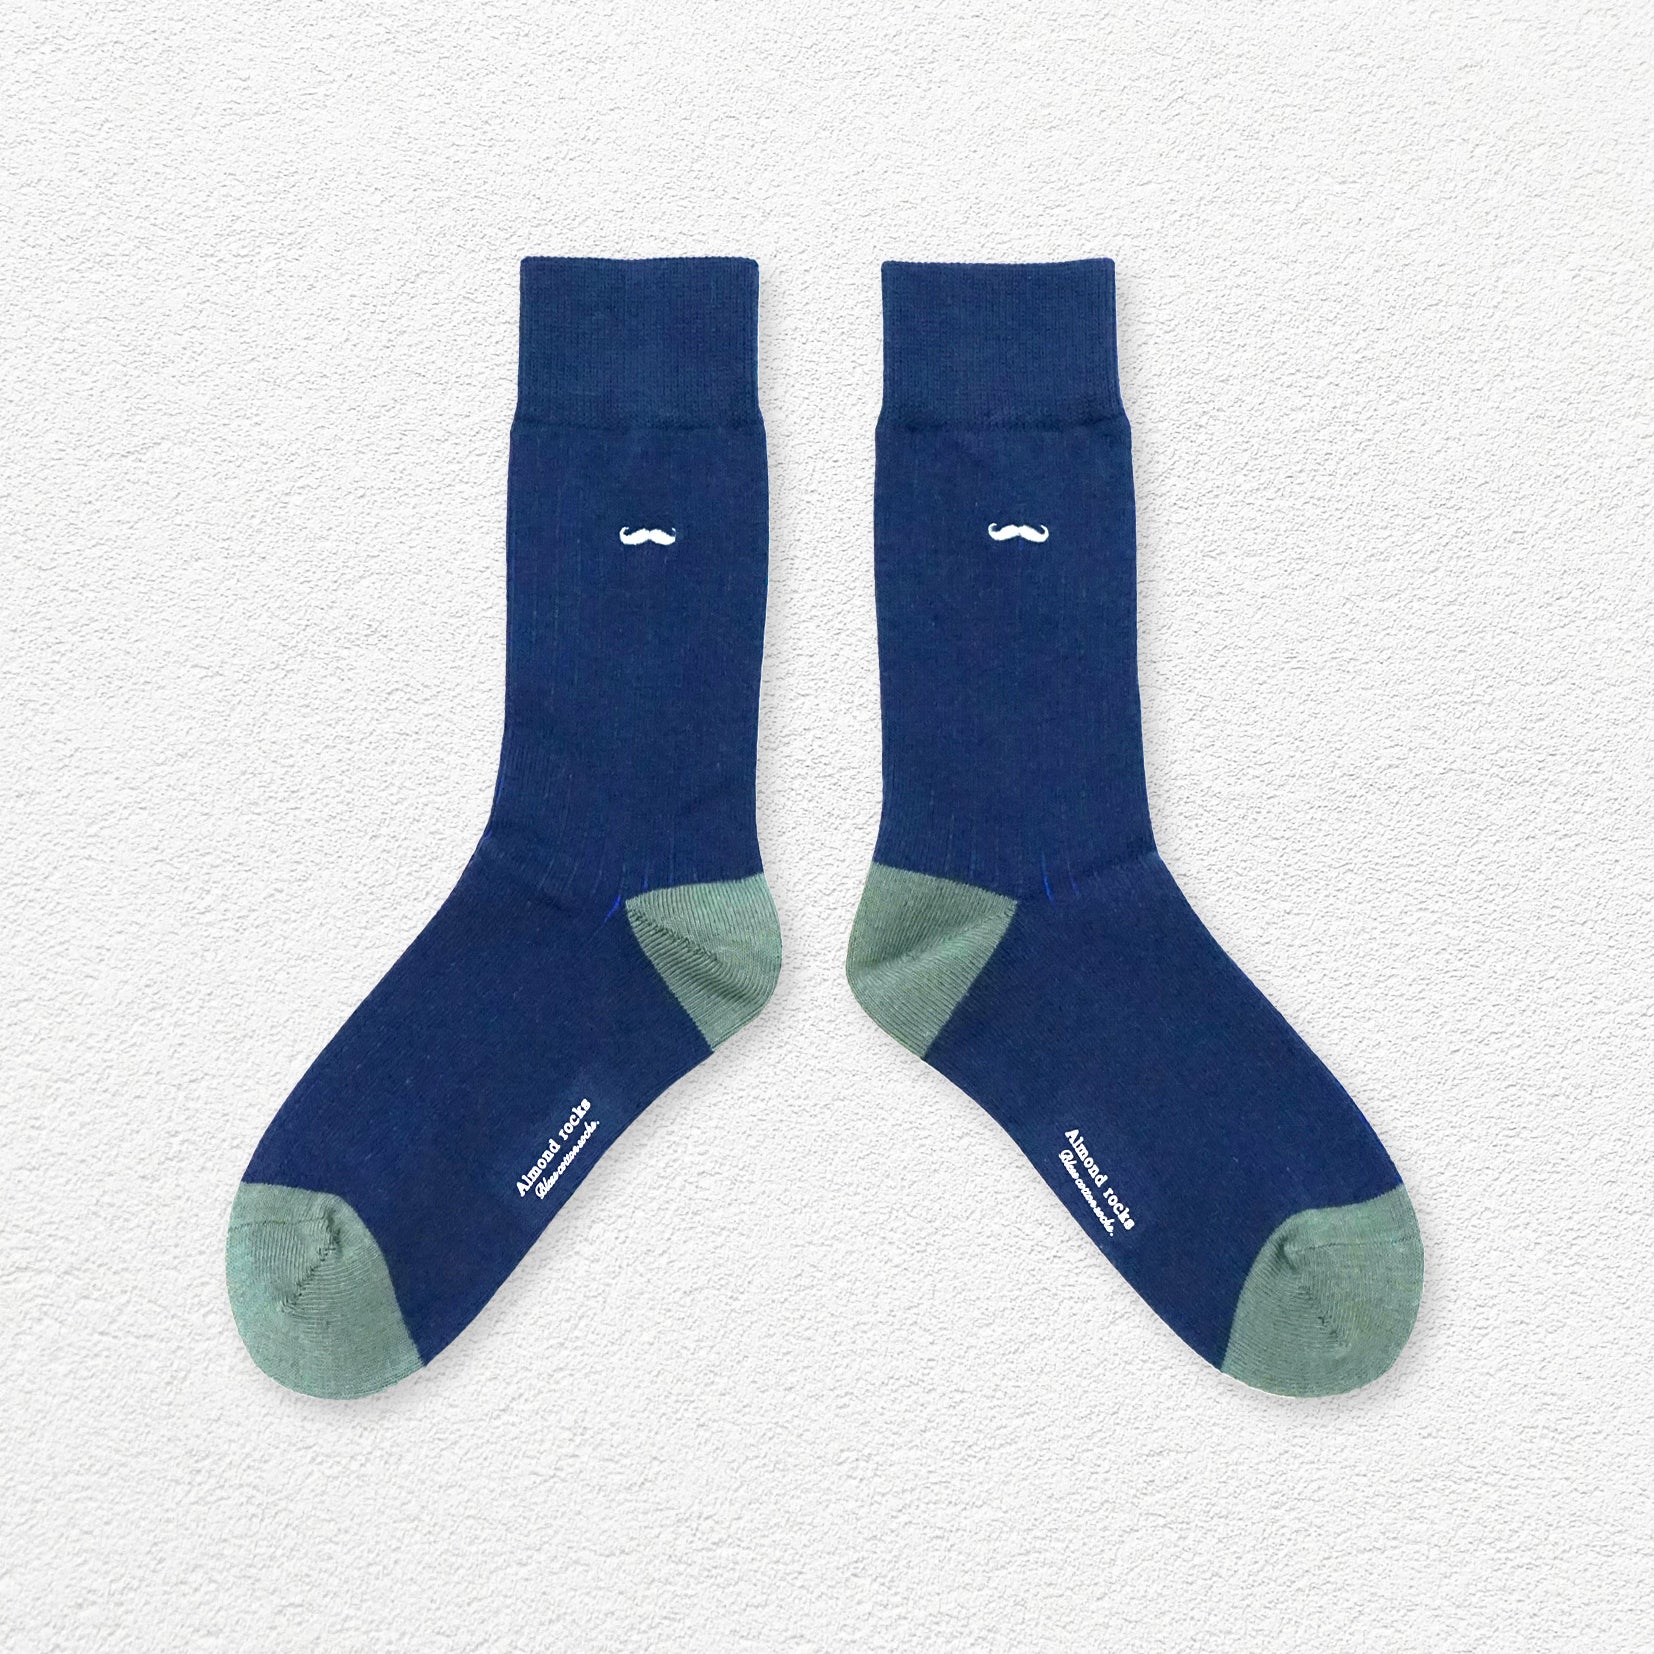 Moustache embroidery mid-calf sock - navy